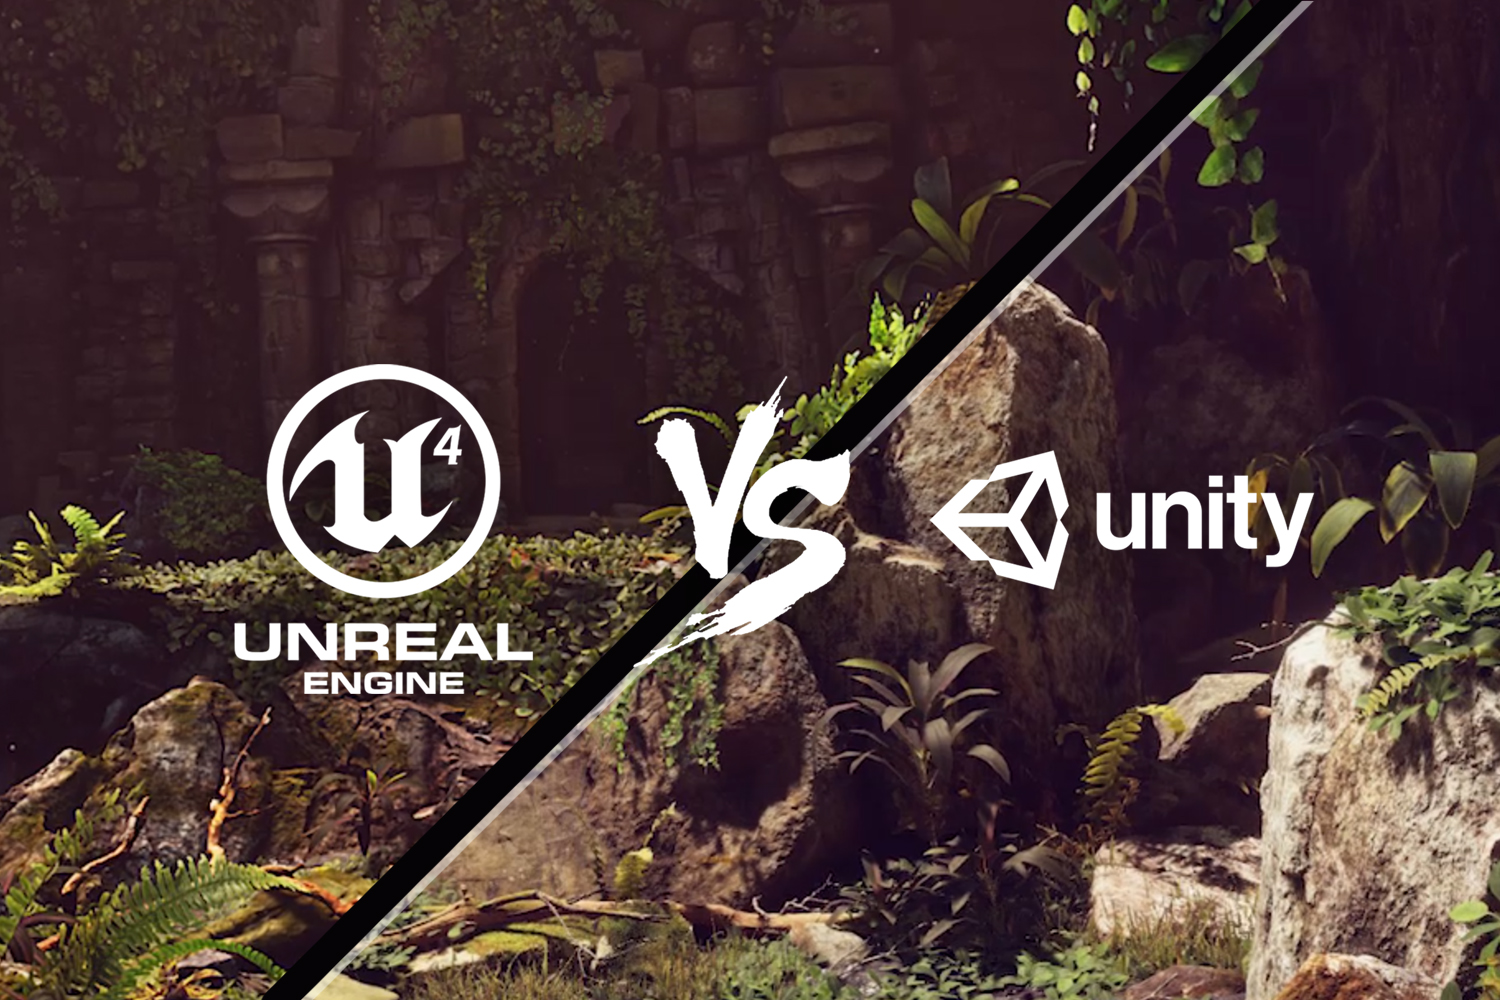 Multiplayer in Unity and Unreal Engine: Developing Online Games and Network  Modes » Unity / Unreal Engine content for game development